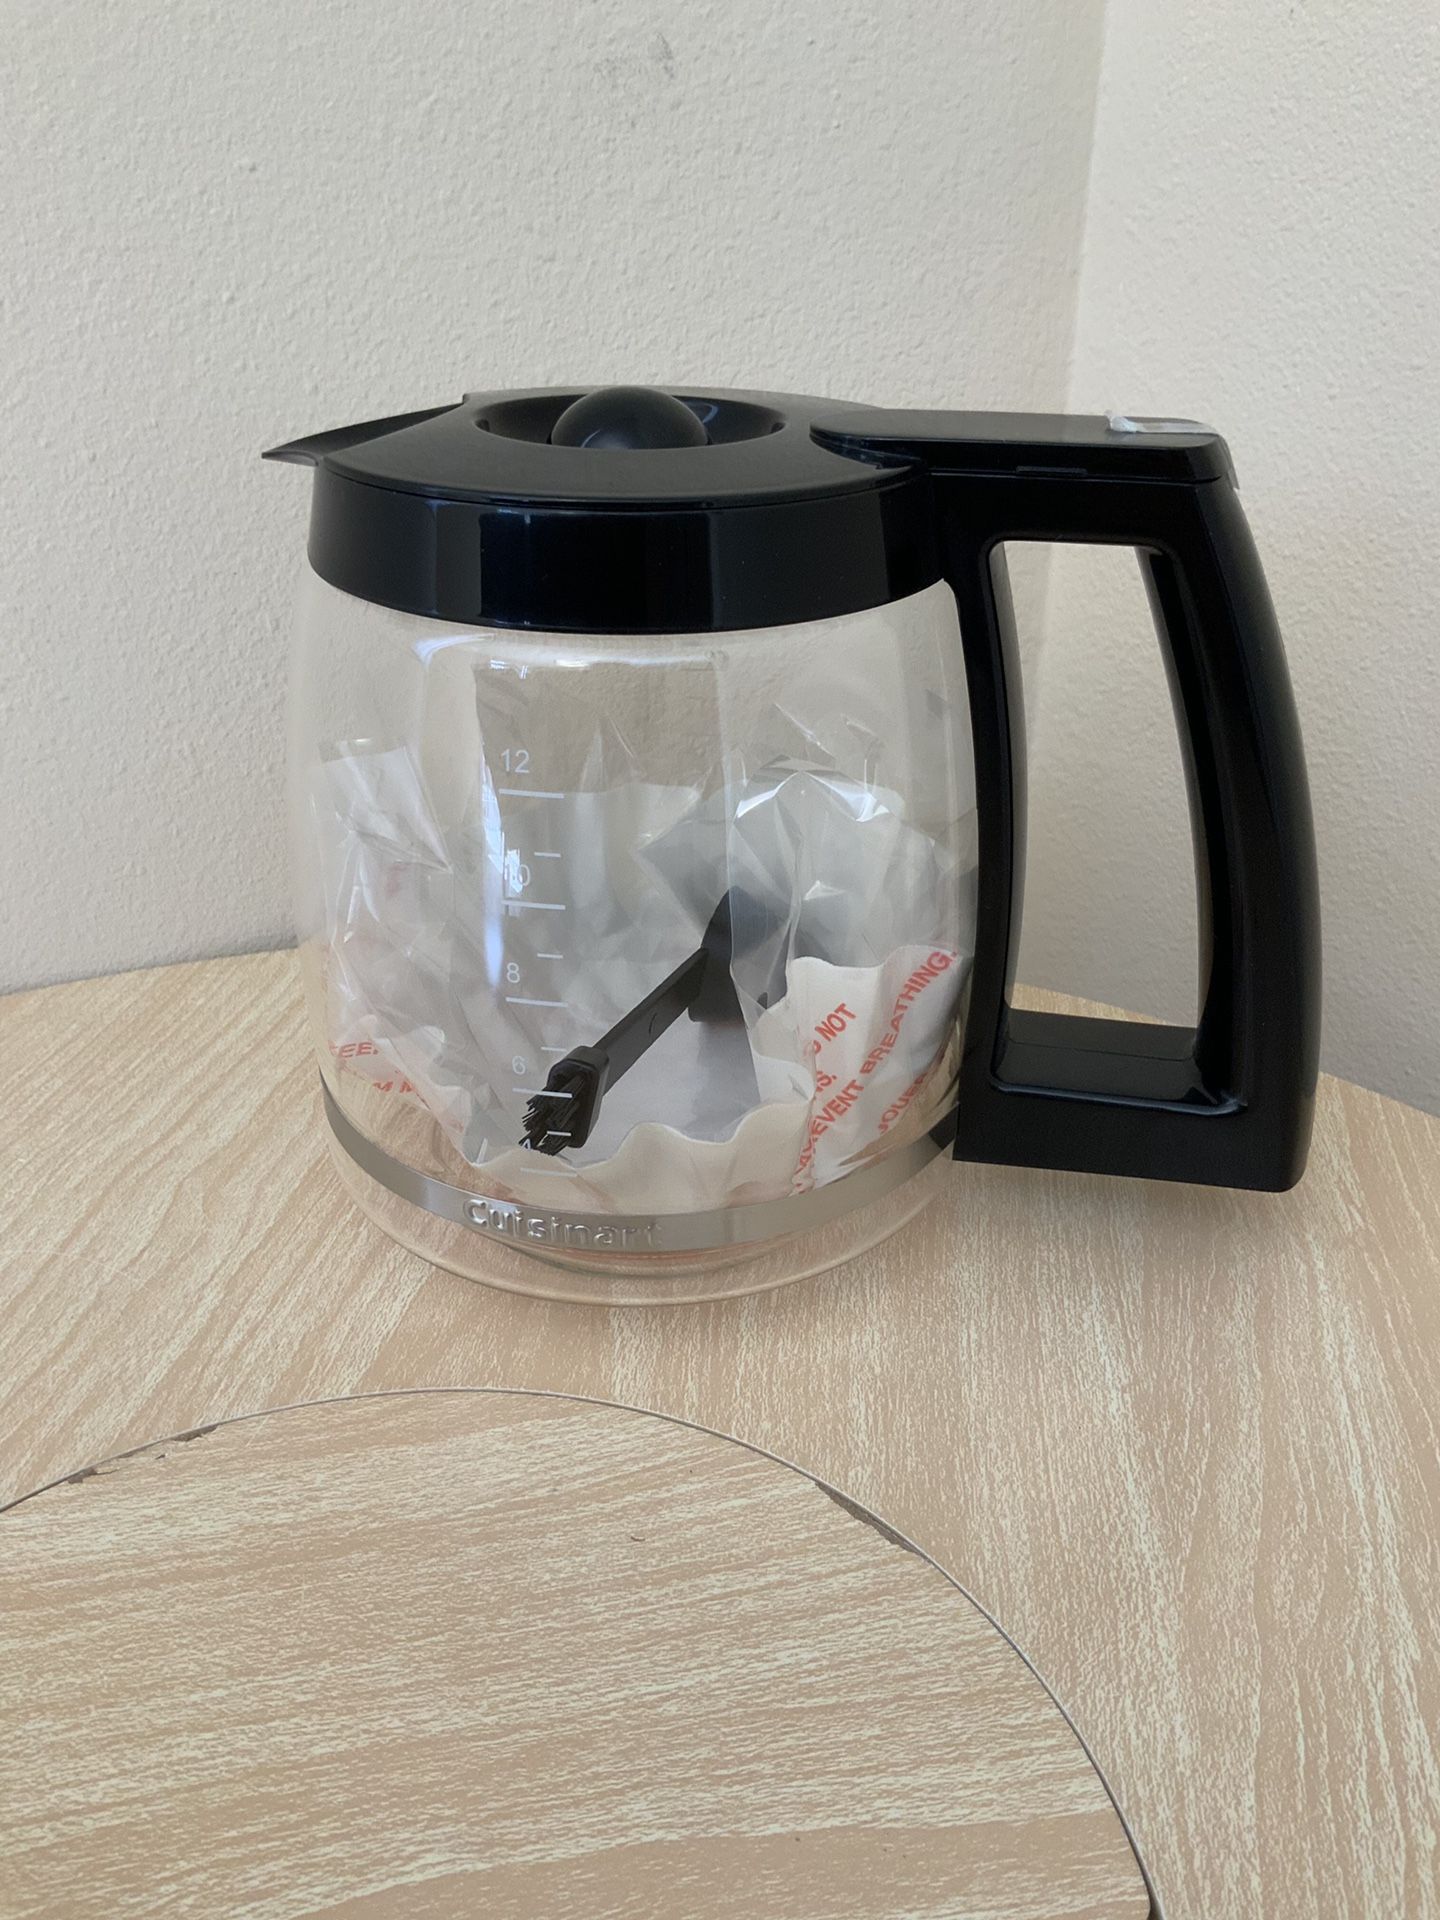 New, Cuisinart glass coffee carafe. 12 cups. Coffee maker glass pot sealed with measuring spoon.